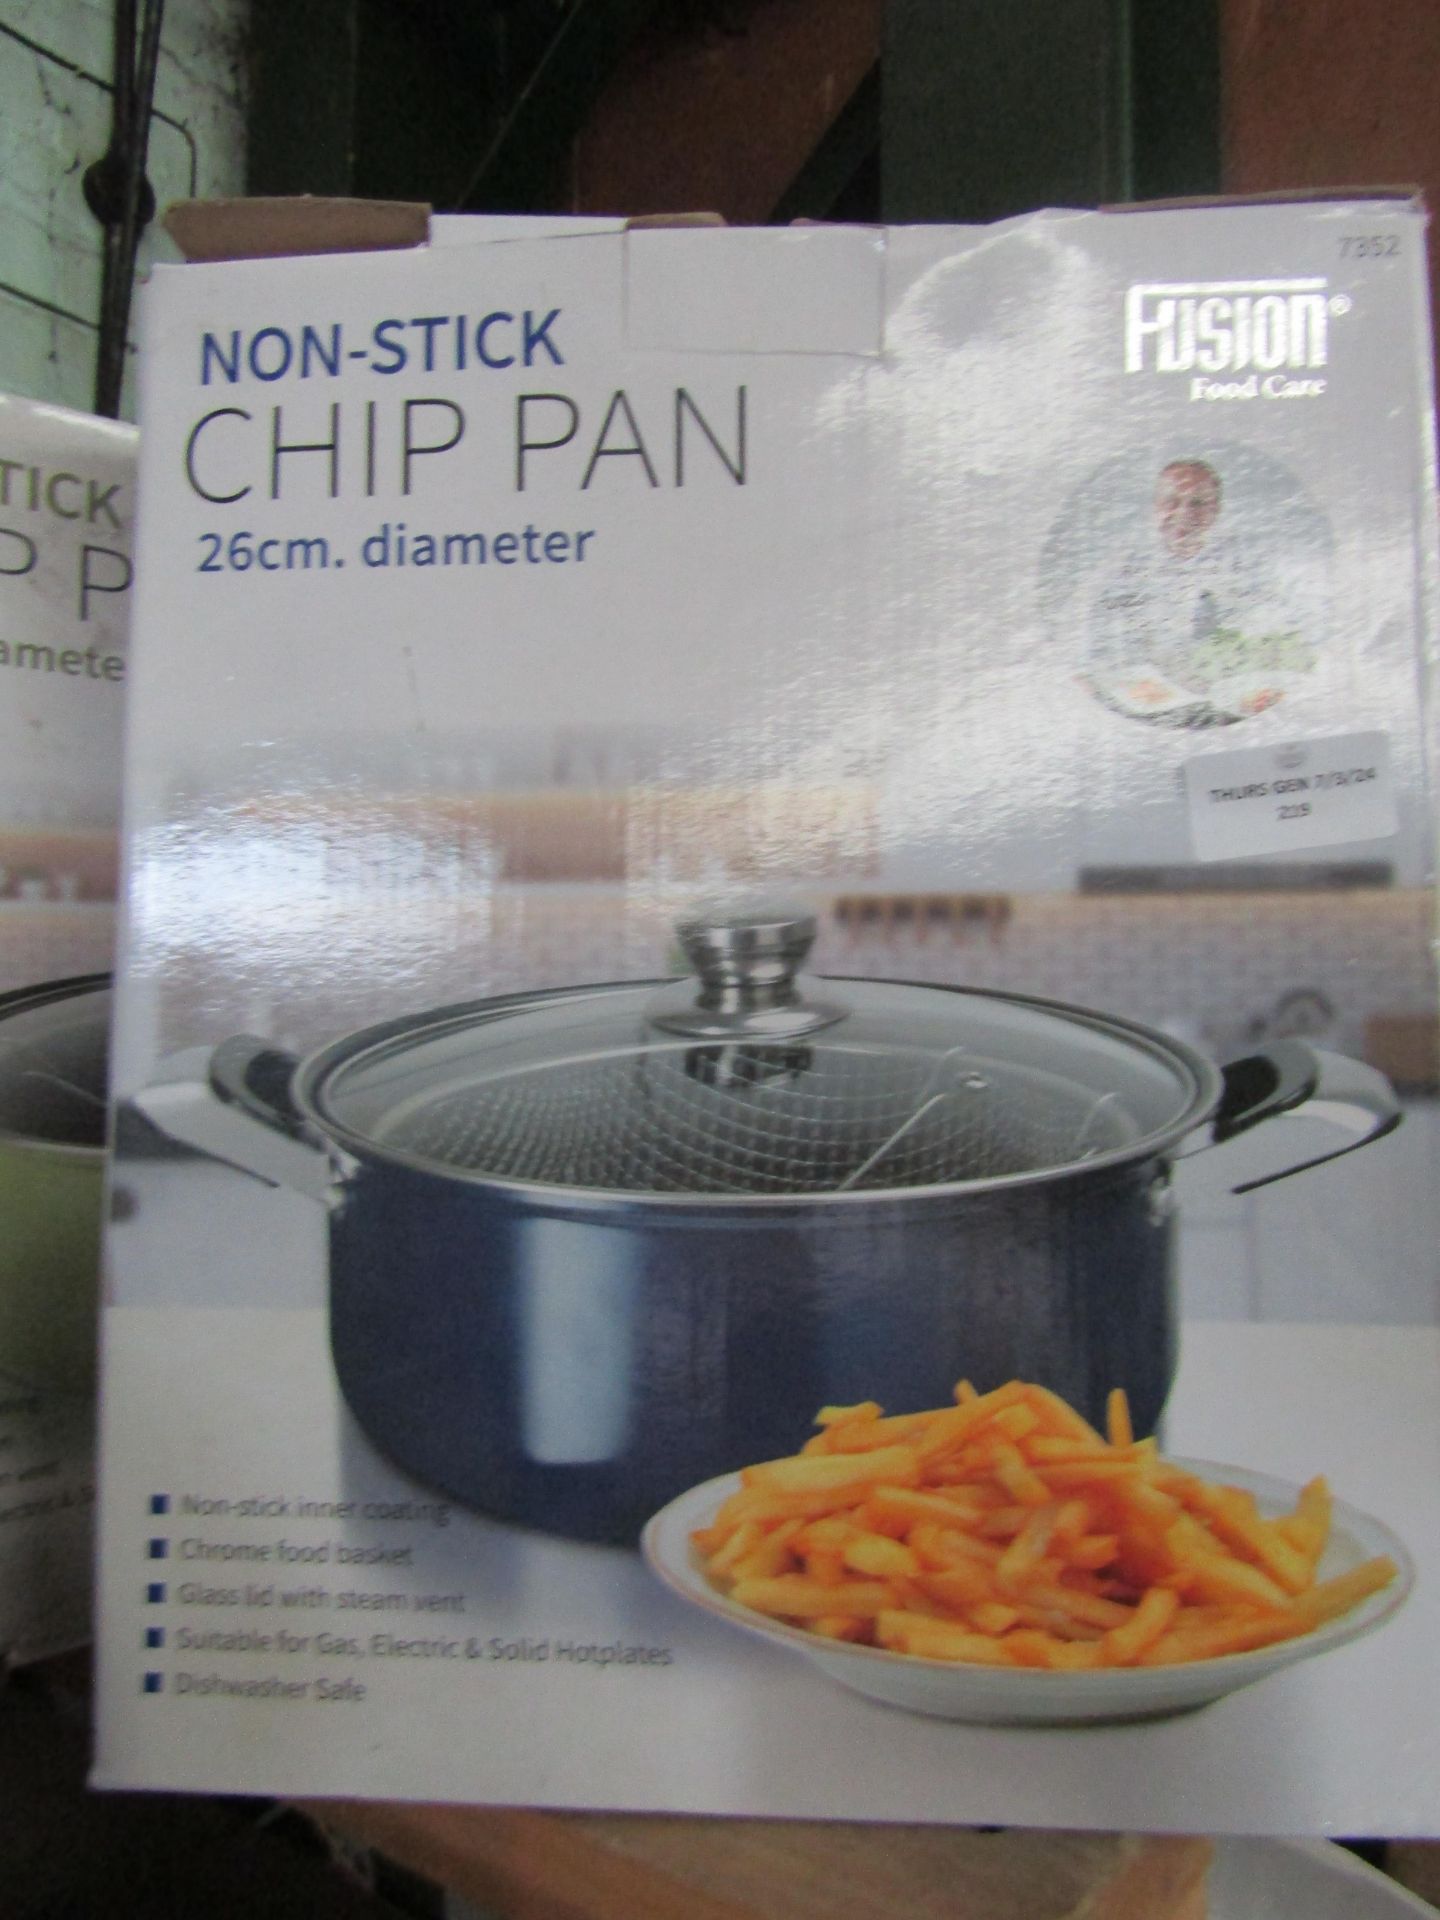 Fusion - Non-Stick 26cm Chip Pan - Unchecked & Boxed.